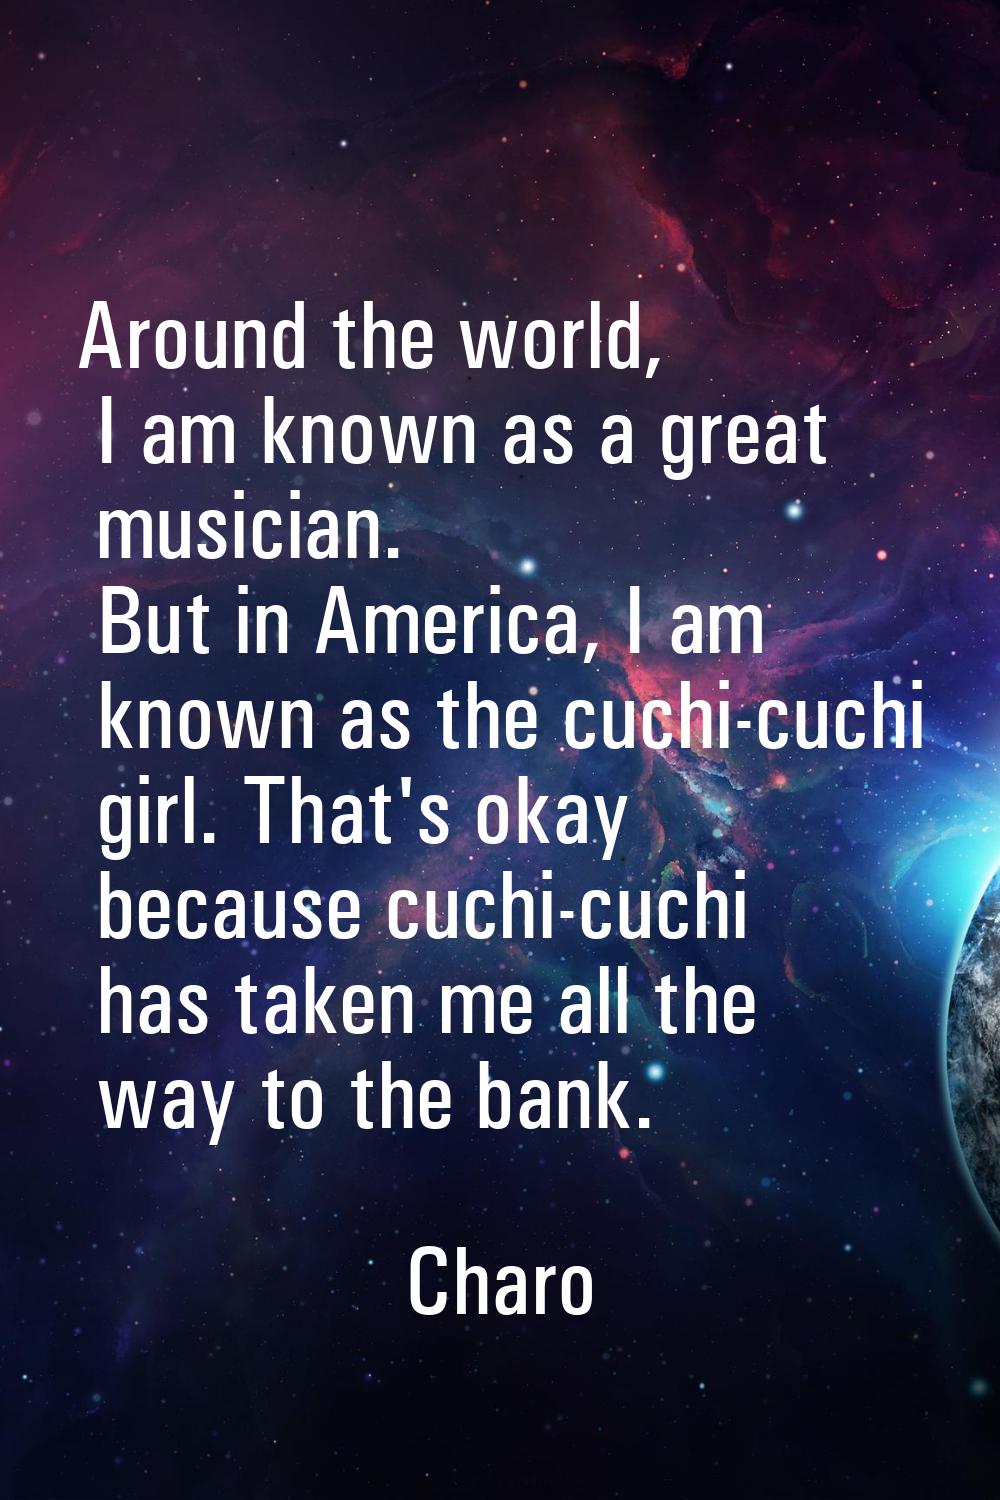 Around the world, I am known as a great musician. But in America, I am known as the cuchi-cuchi gir